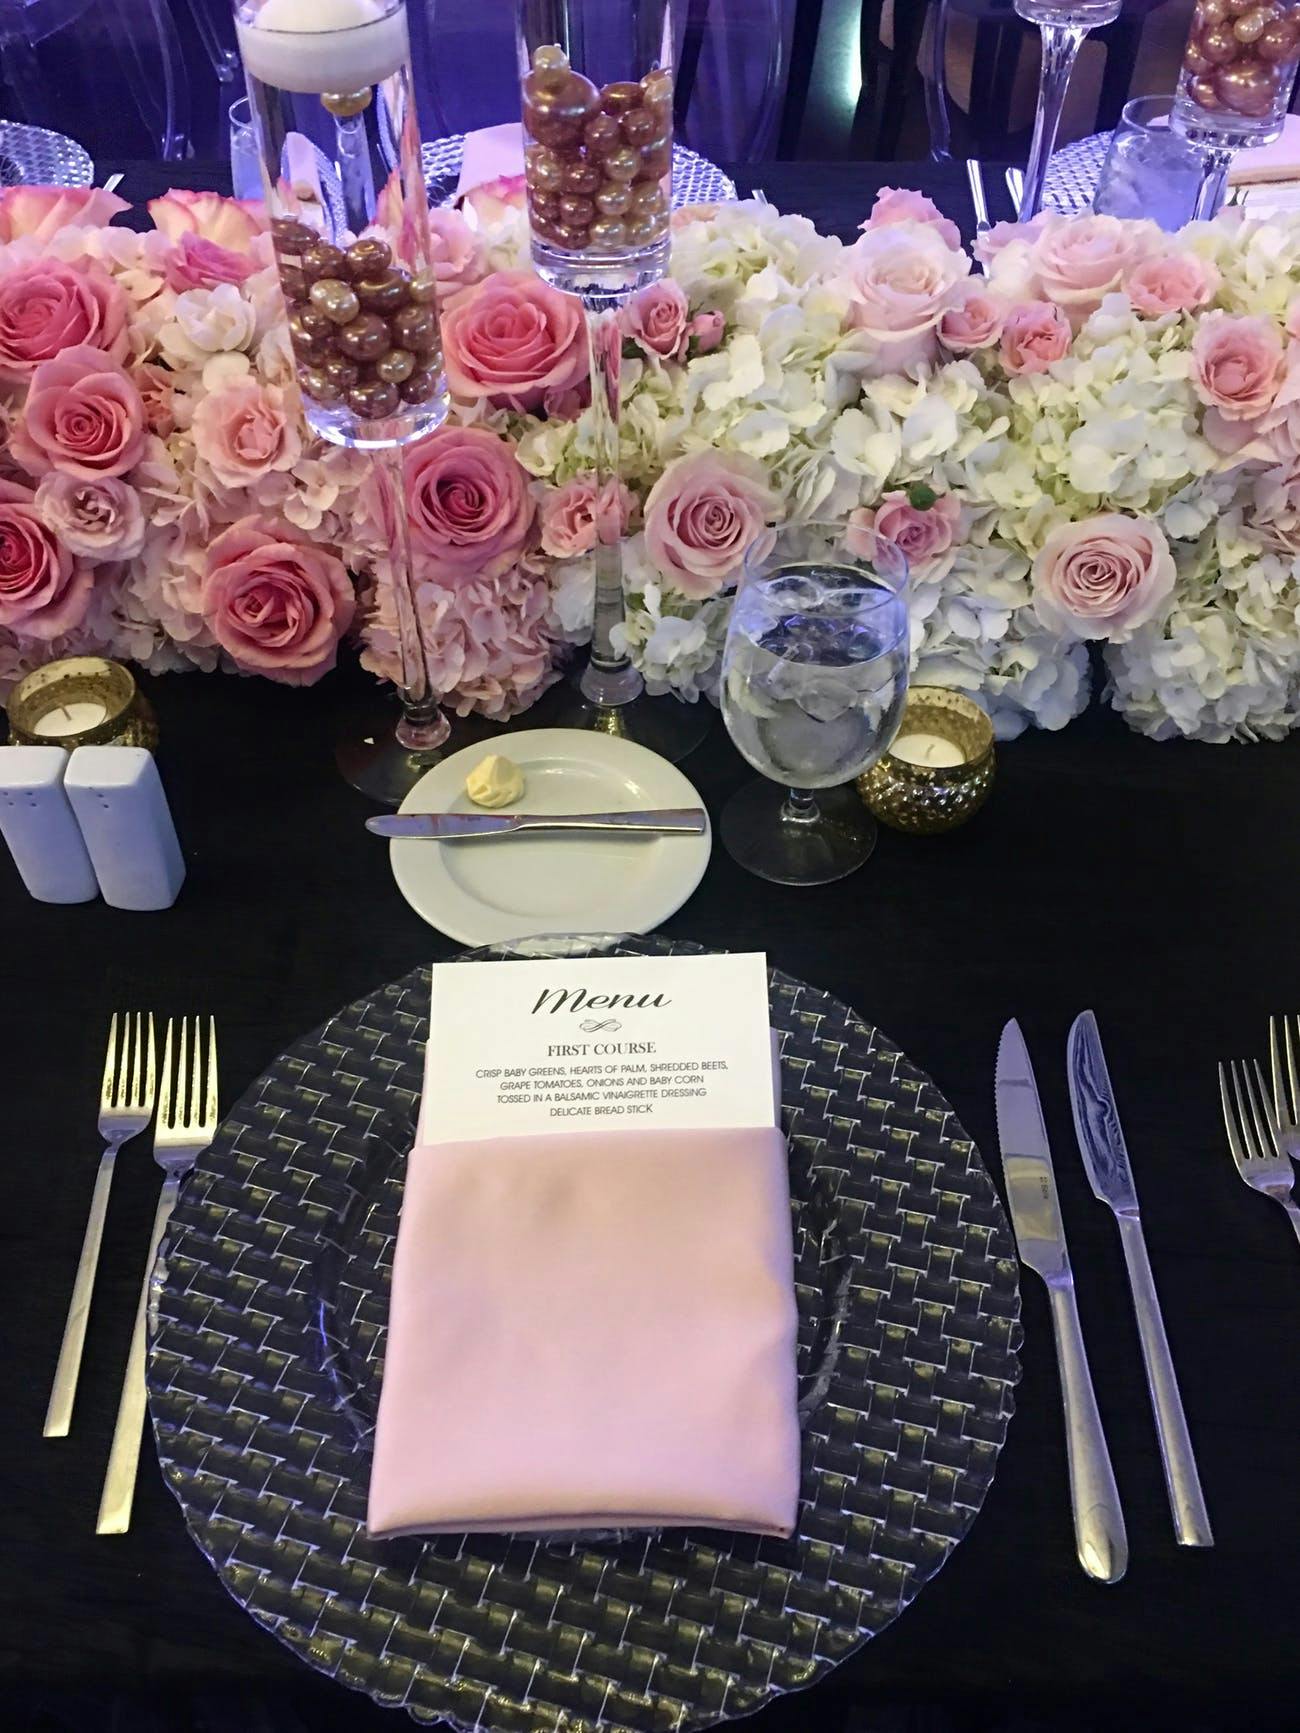 Black and White Plate with Pink Napkin and Floral Centerpiece